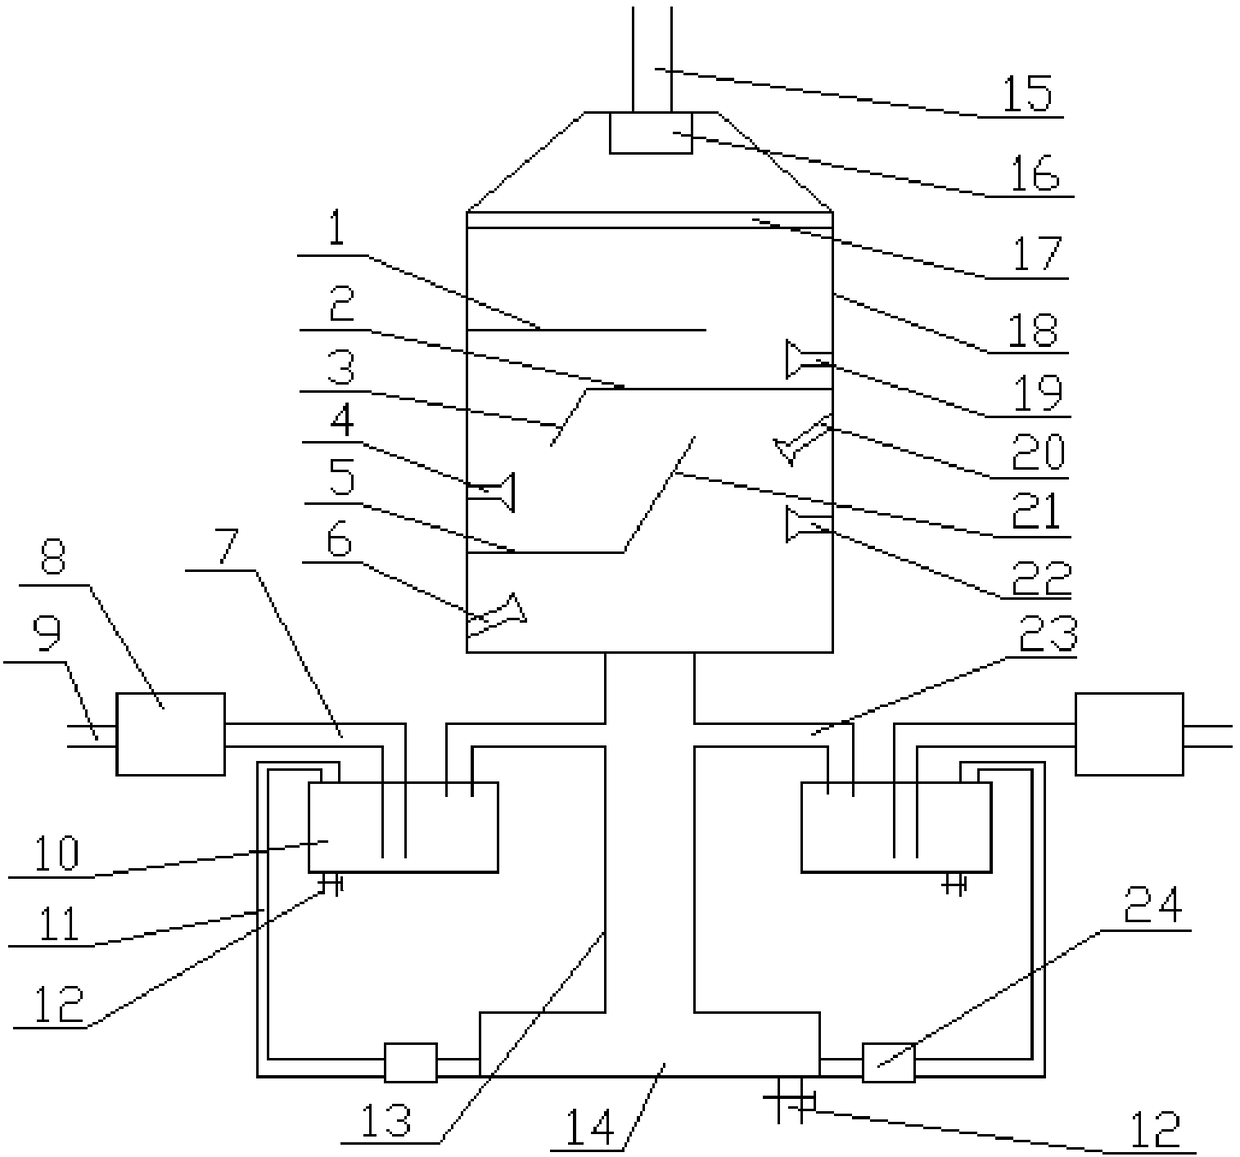 Multi-stage exhaust gas treatment device